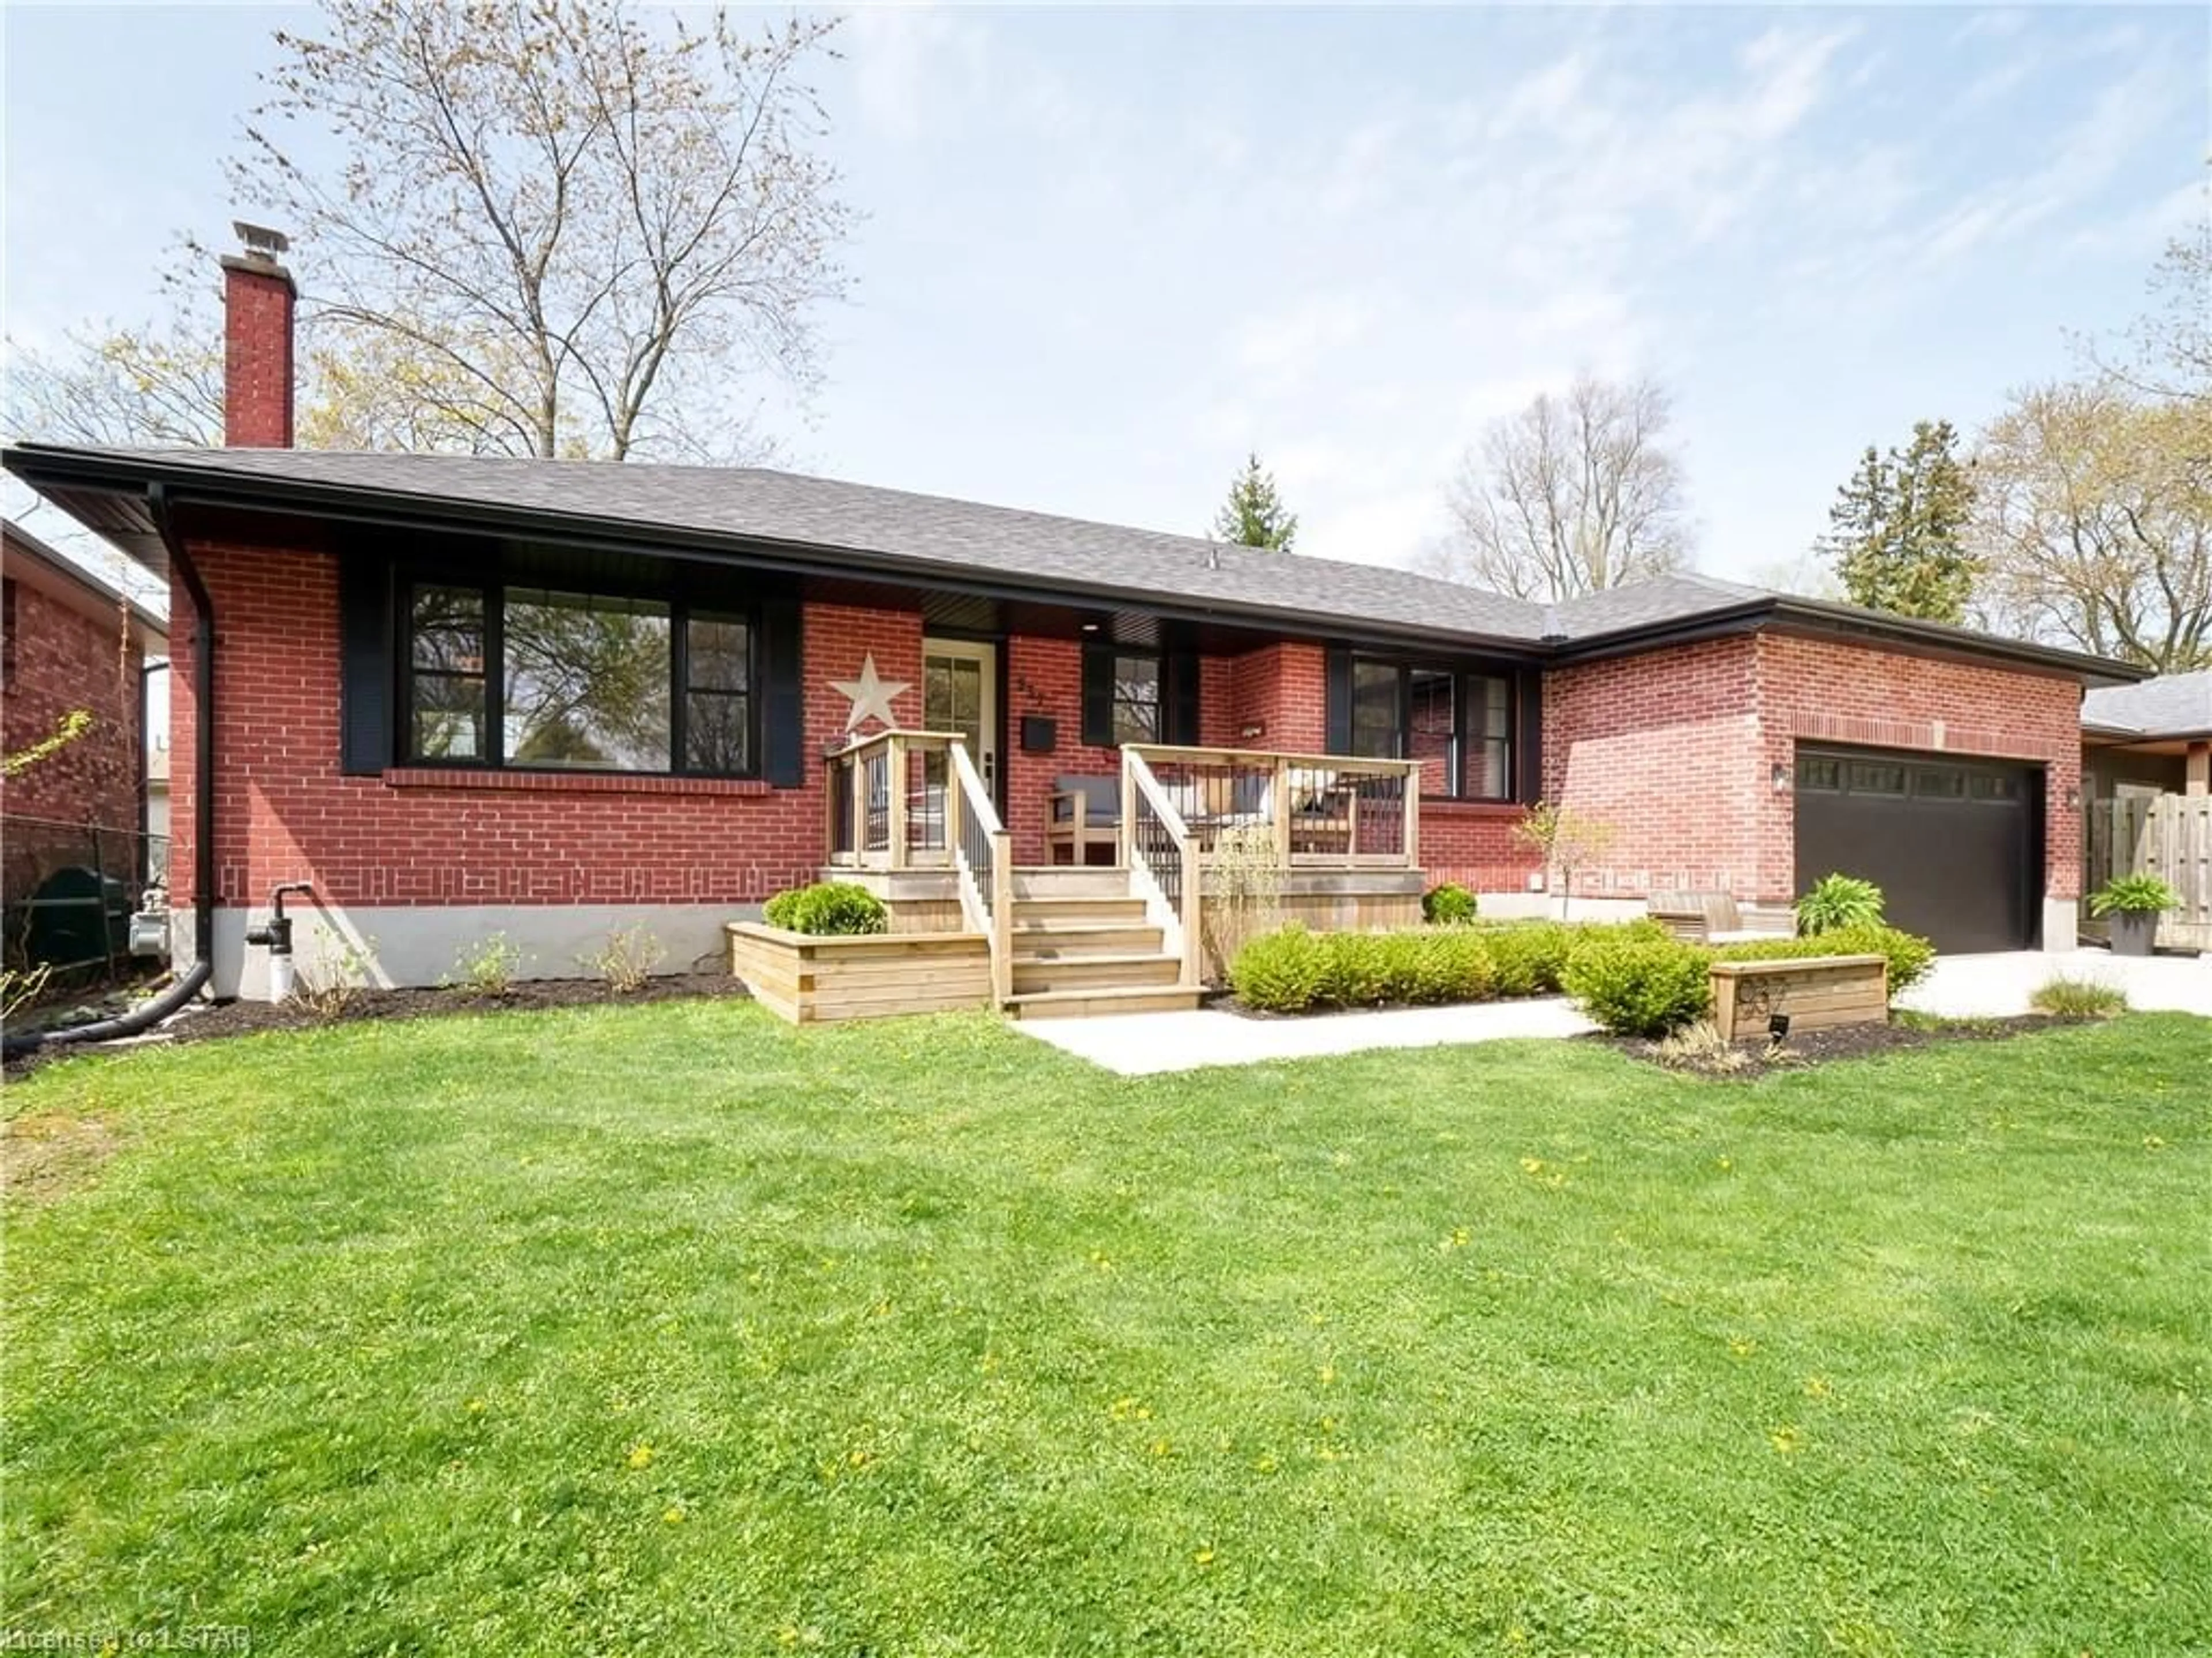 Home with brick exterior material for 937 Glenbanner Rd, London Ontario N6E 1N1